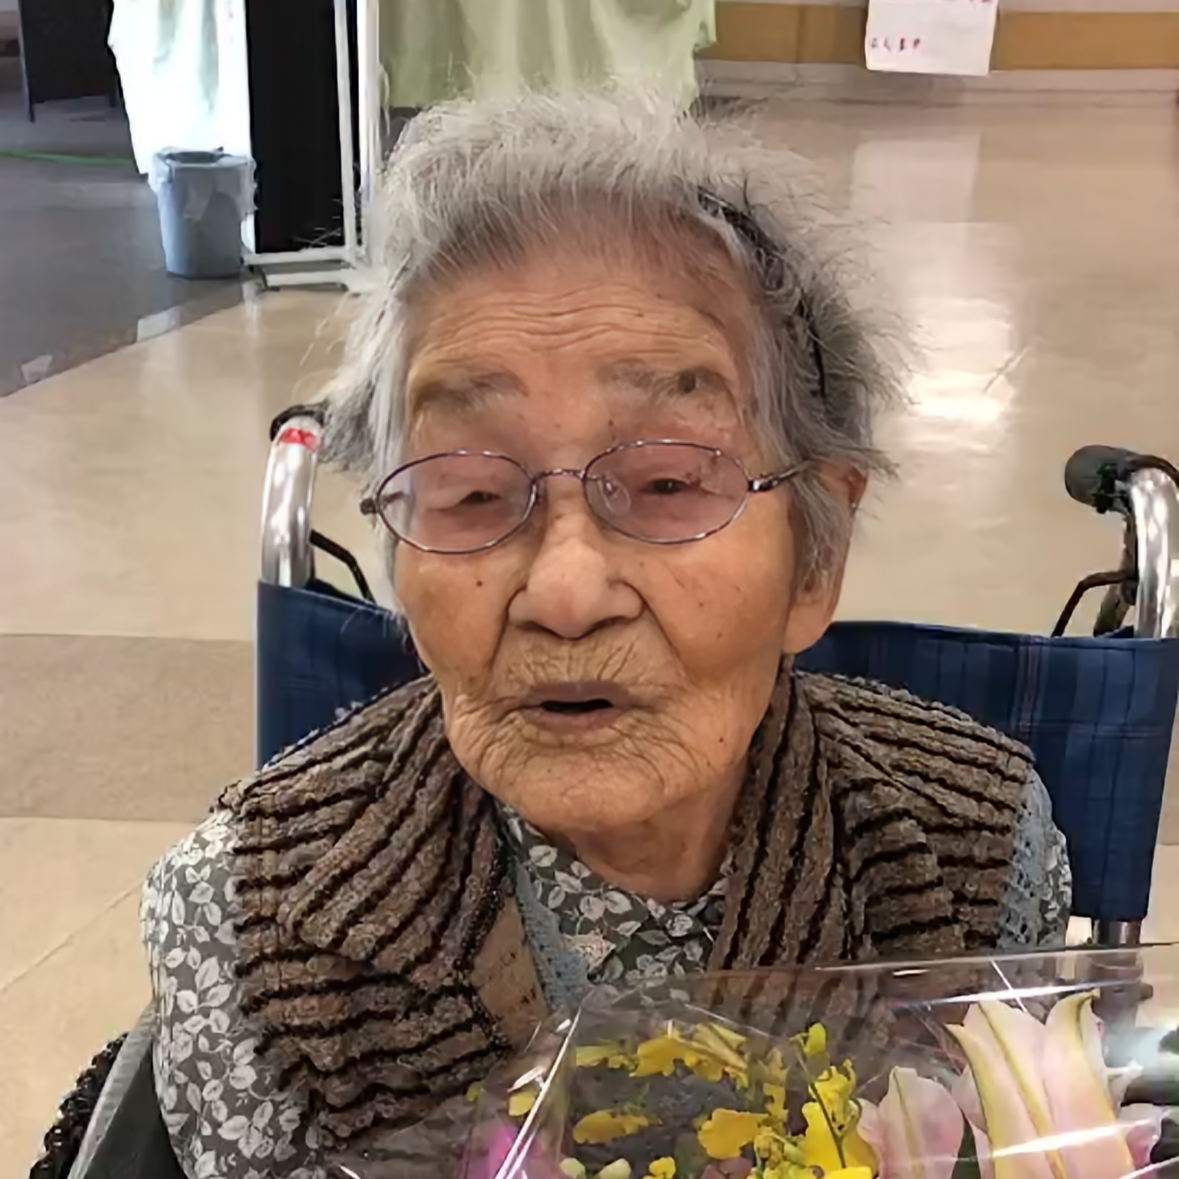 On her 109th birthday. (Source: Courtesy of the family)